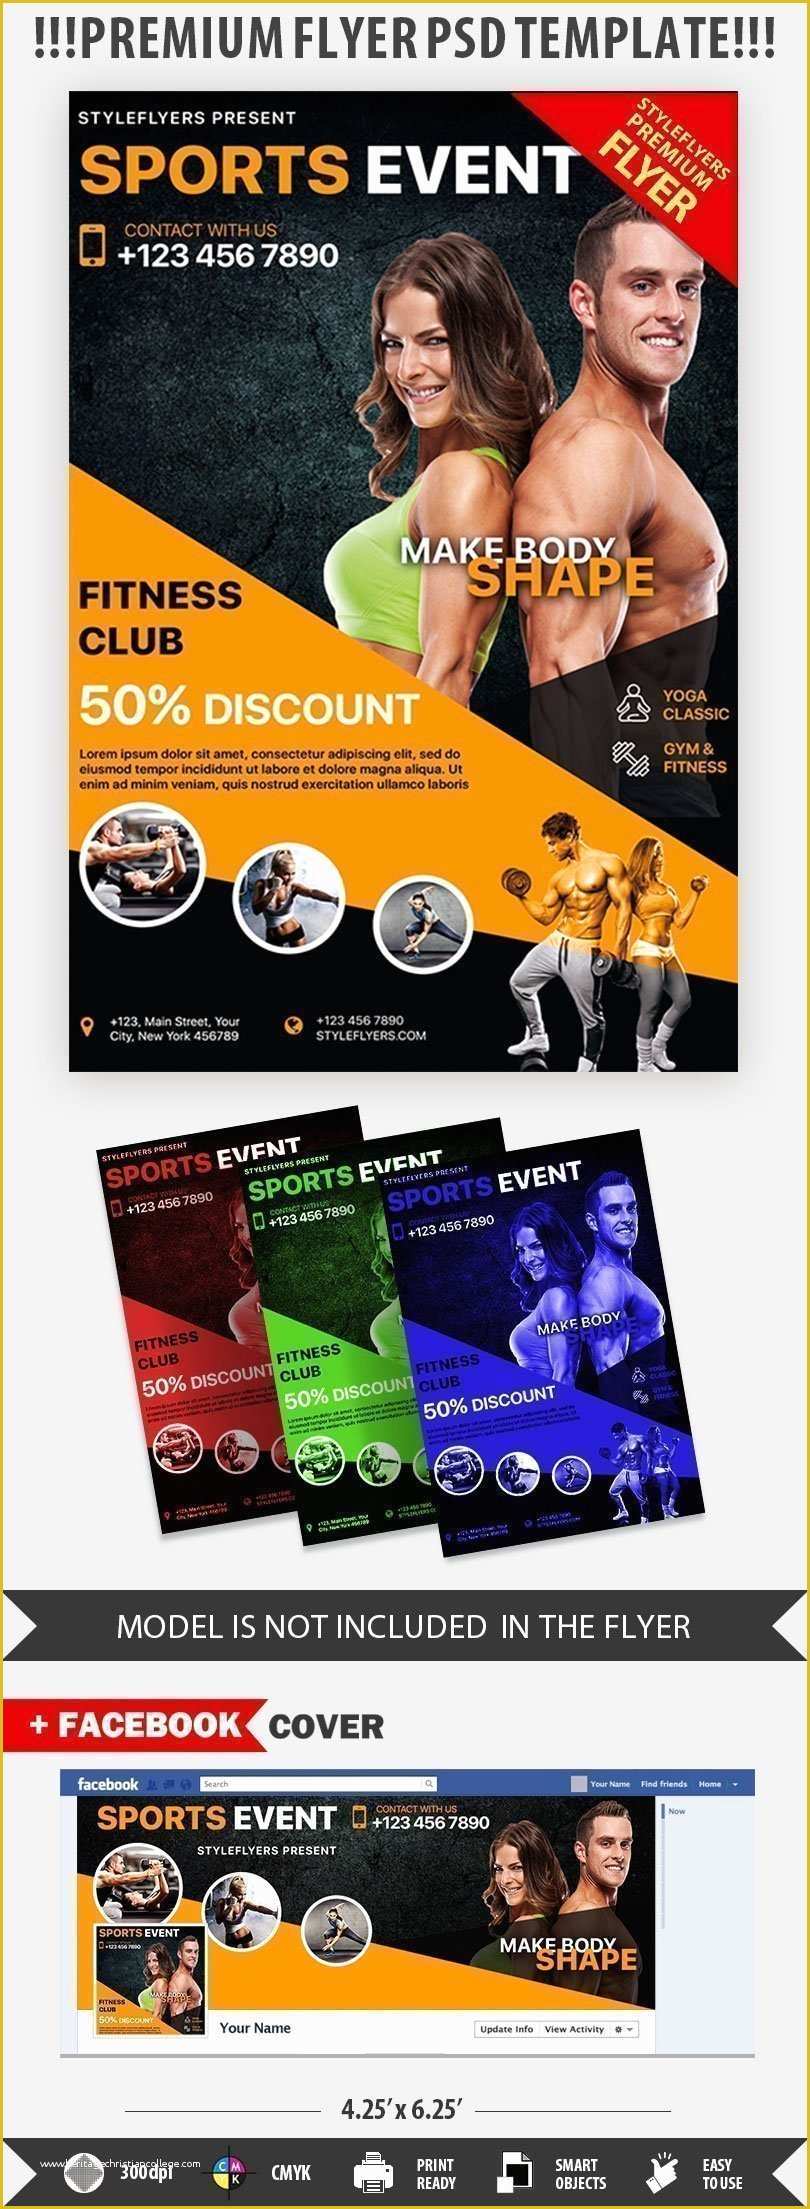 Sports event Flyer Template Free Of Sports event Psd Flyer Template Styleflyers